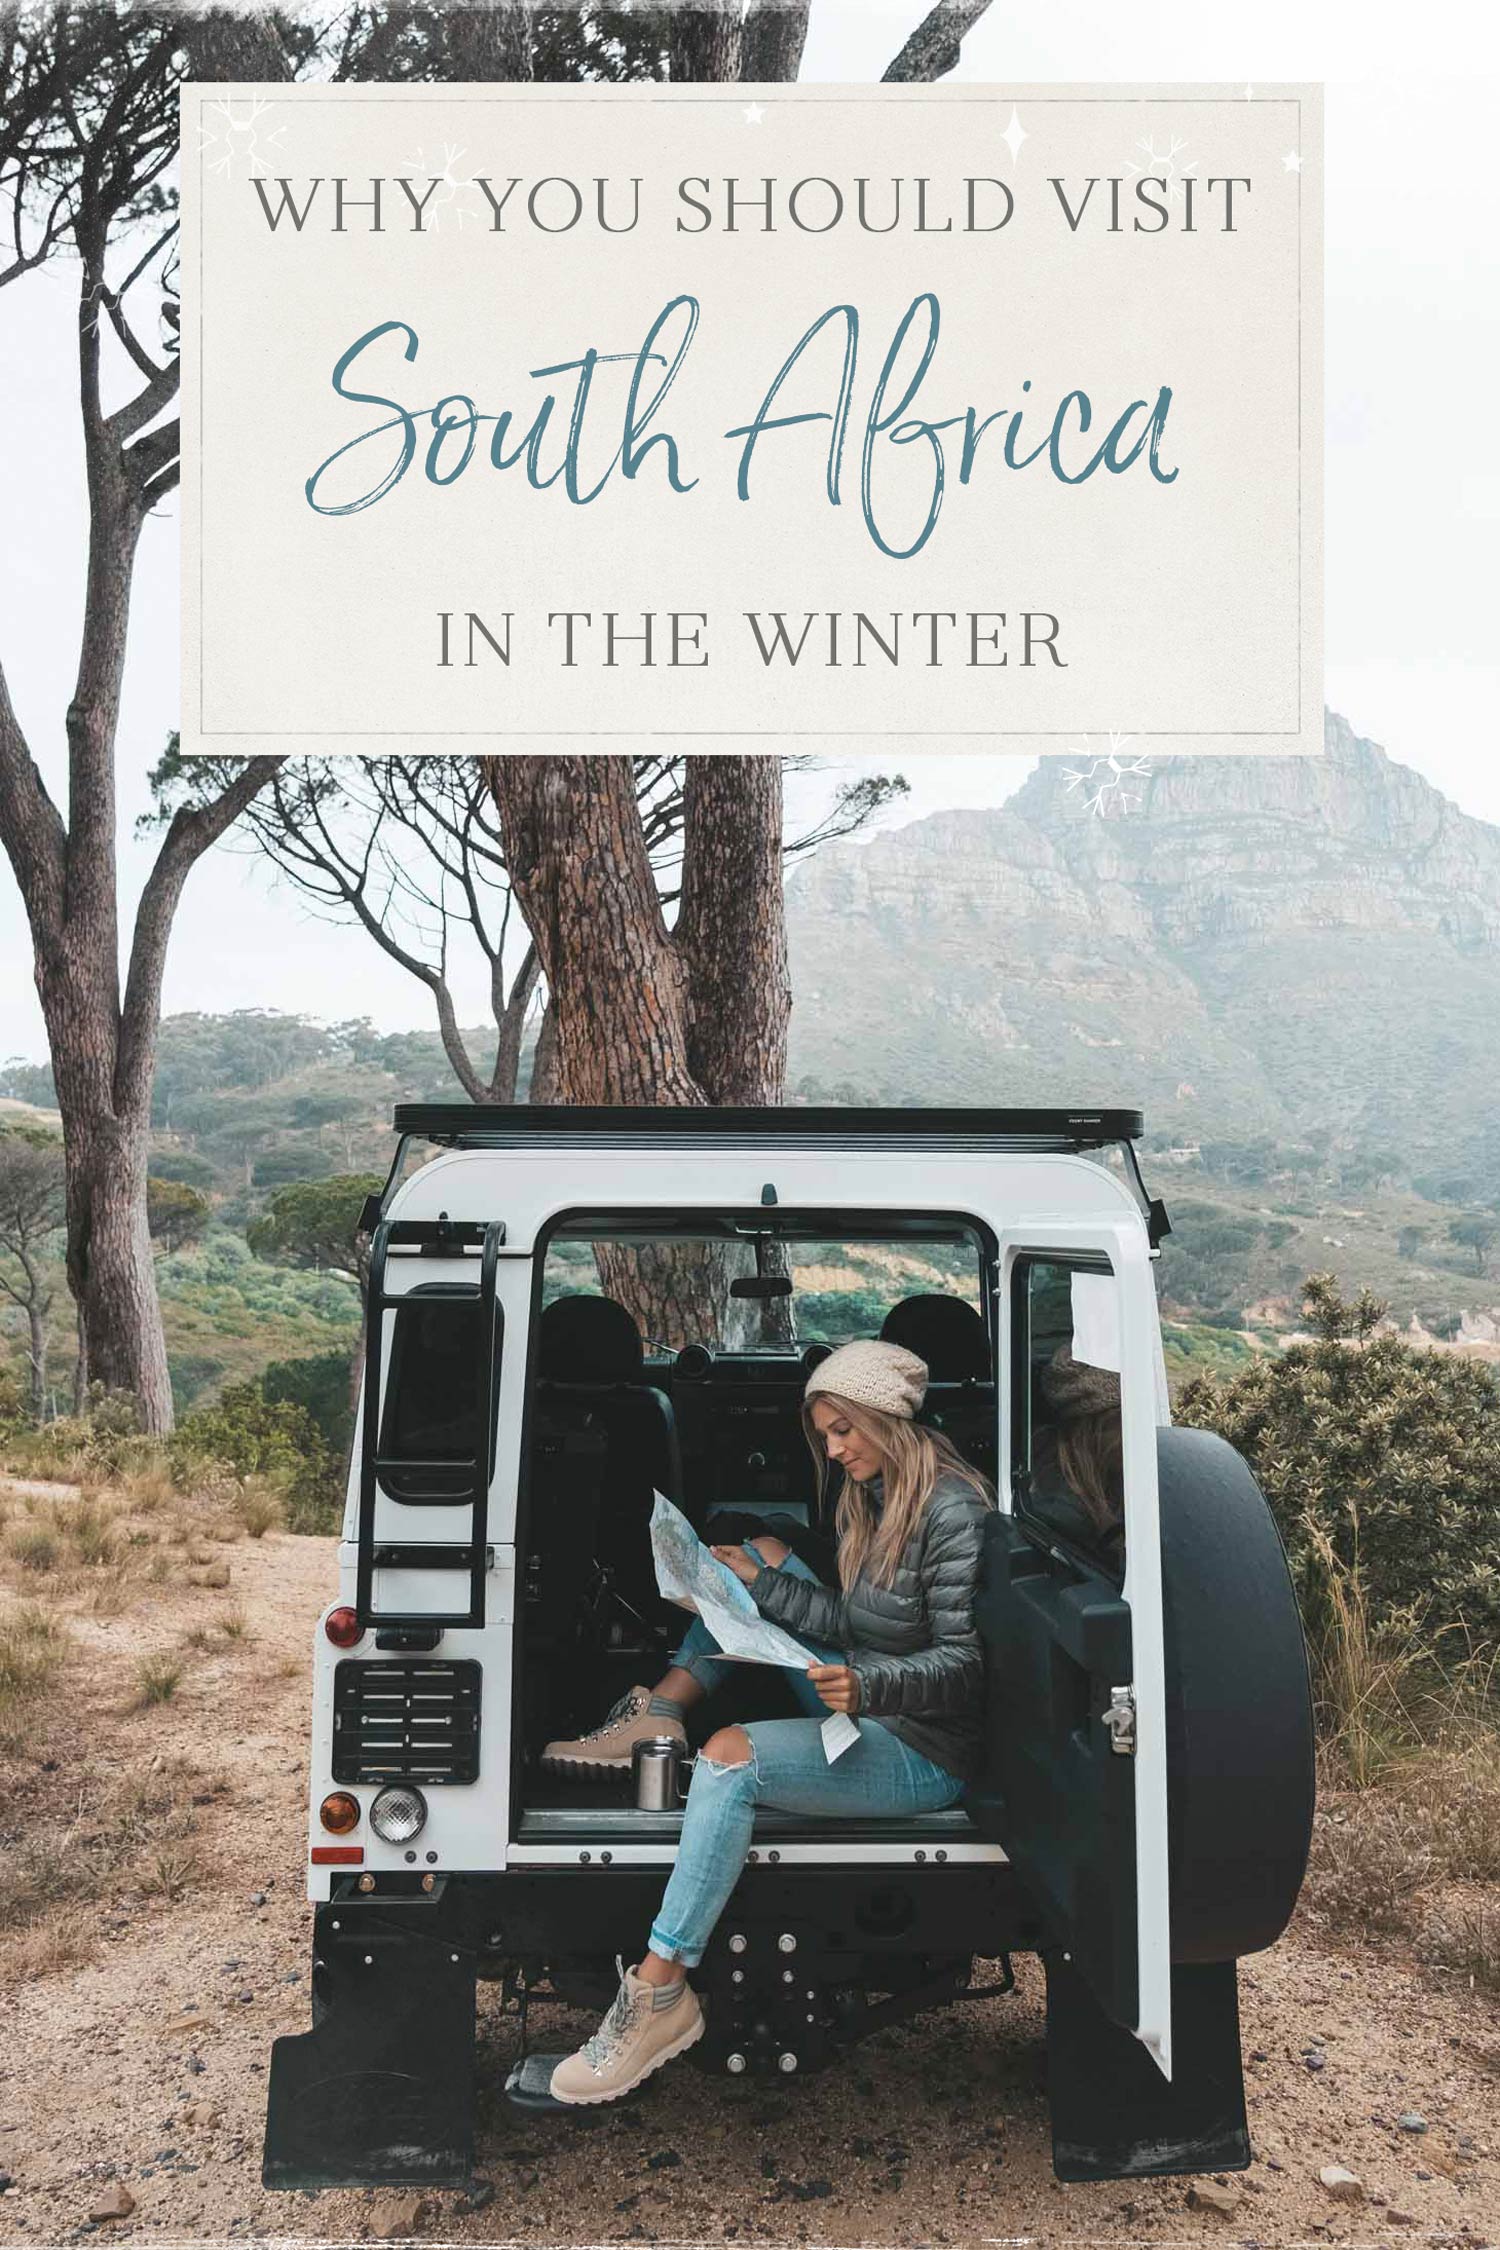 Why You Should Travel to South Africa in the Winter